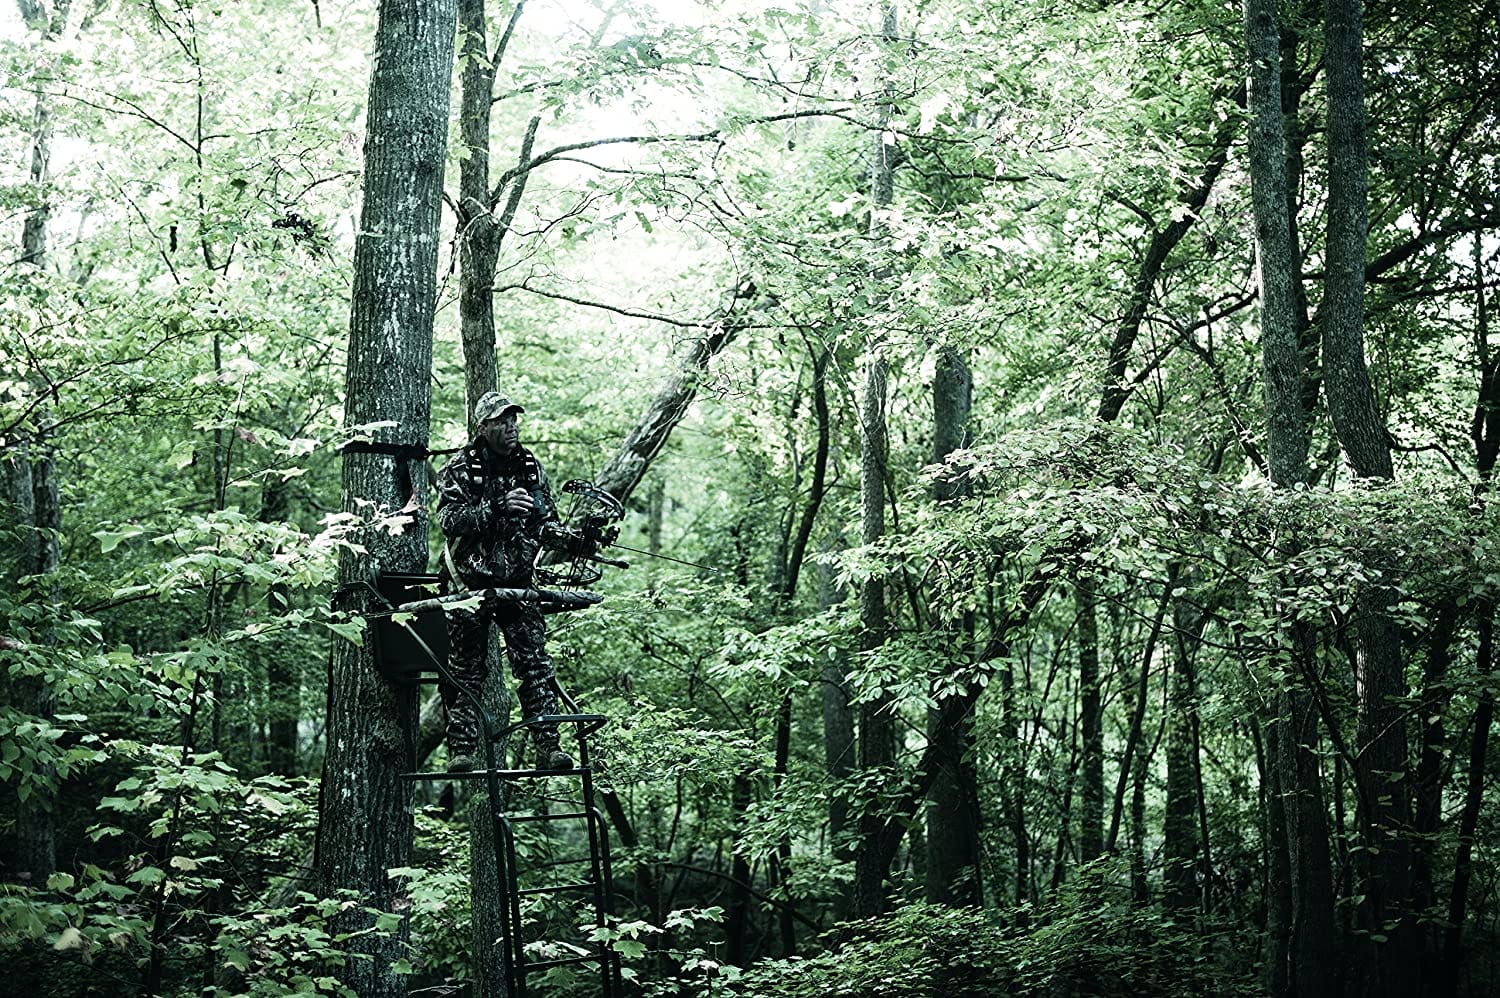 Best Ladder Stand – Review the Best Ways to Hunt From Above!